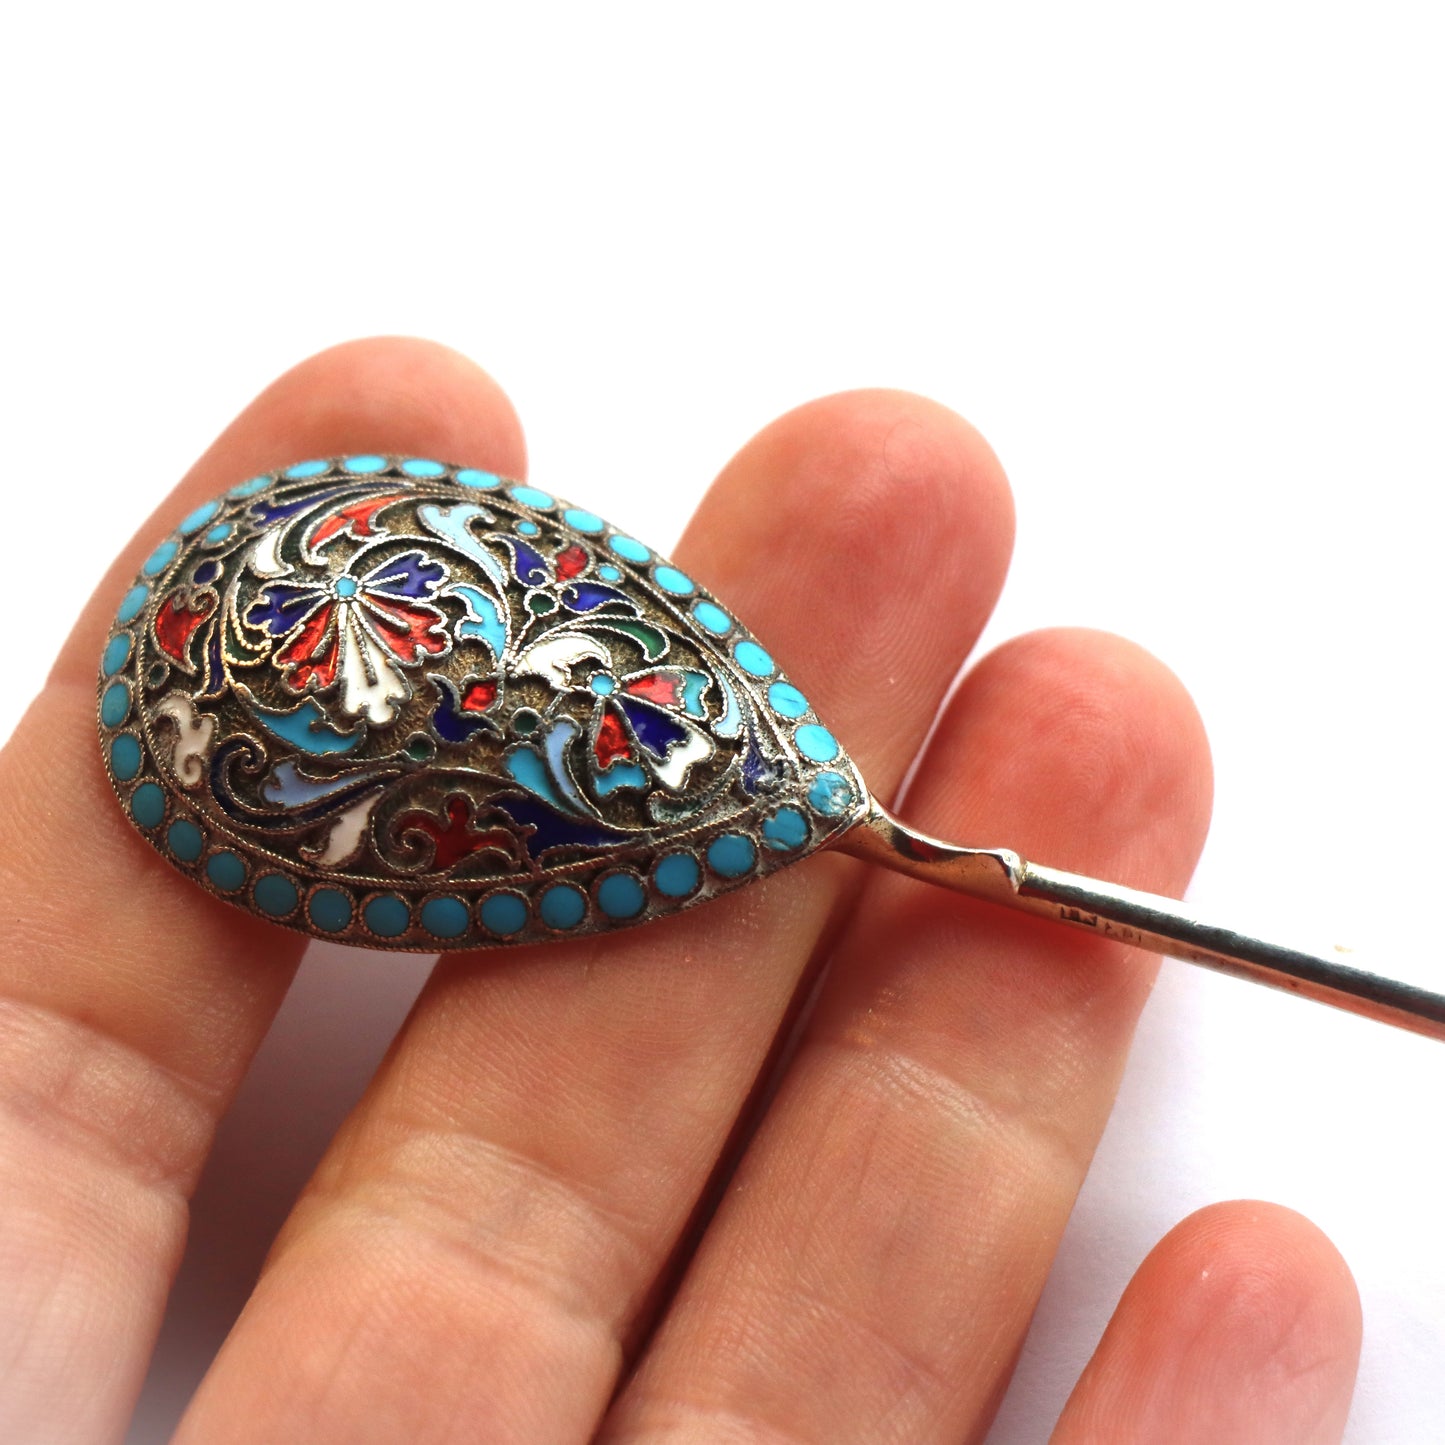 Antique Imperial Russian Shaded Cloisonne 875 Silver Enamel Spoon